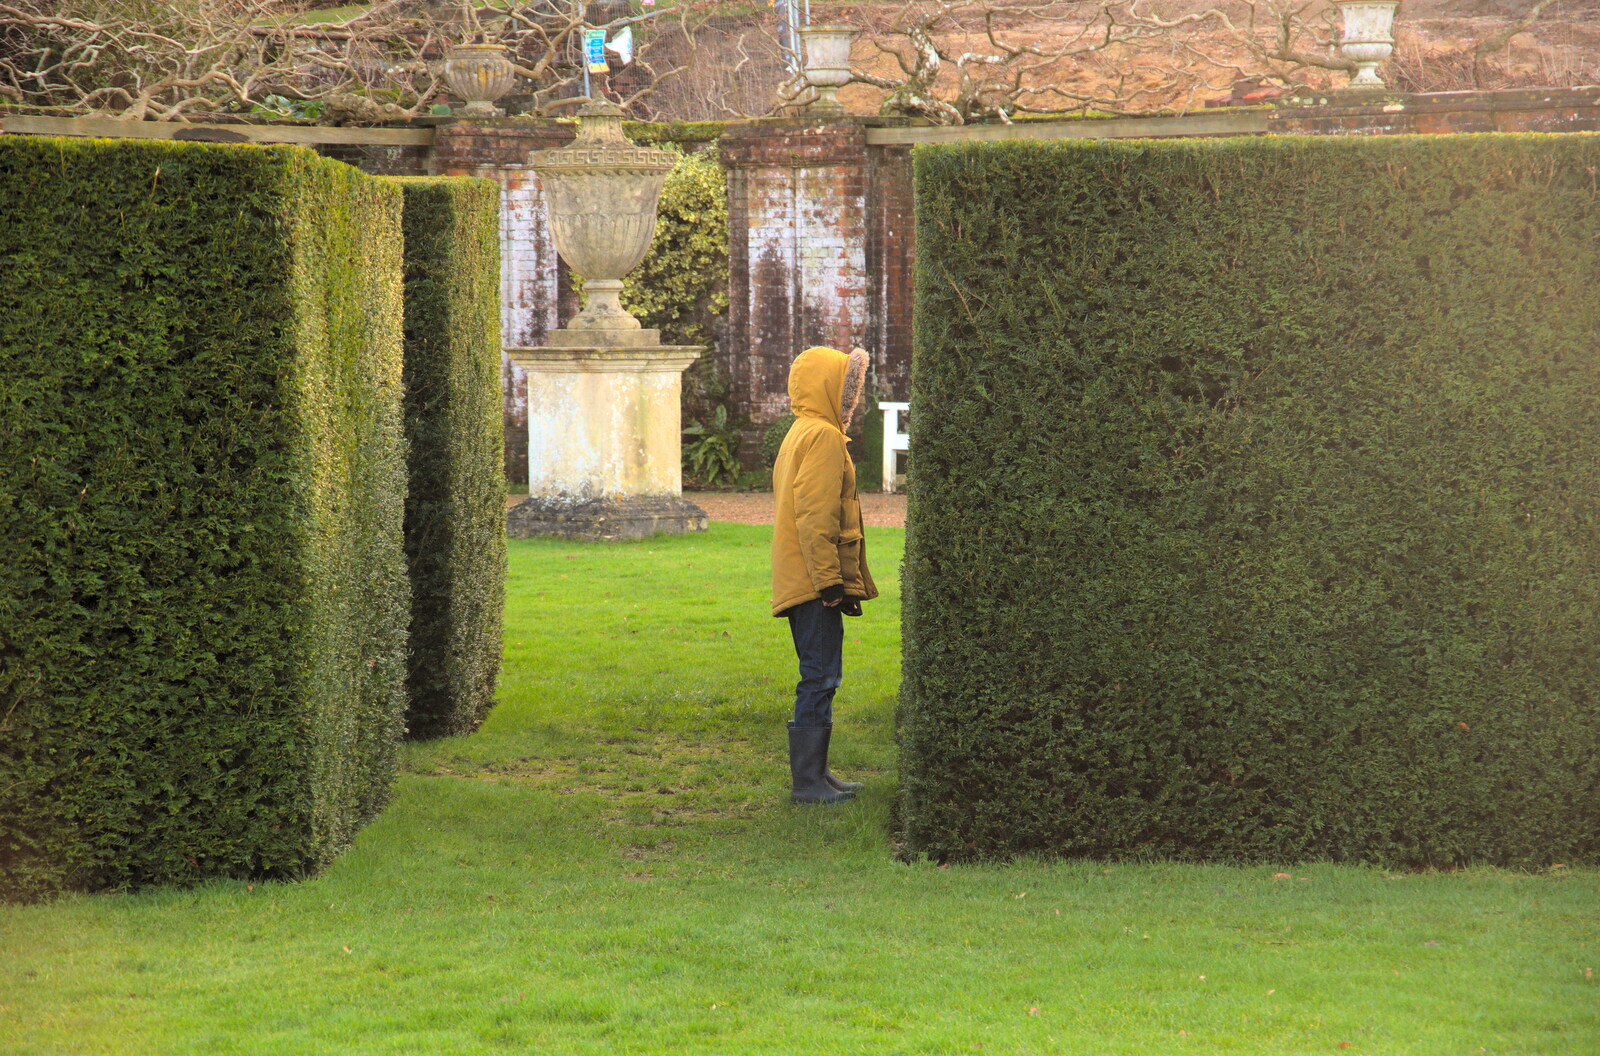 Harry does a bit of hiding from A Visit to Blickling Hall, Aylsham, Norfolk - 9th January 2022